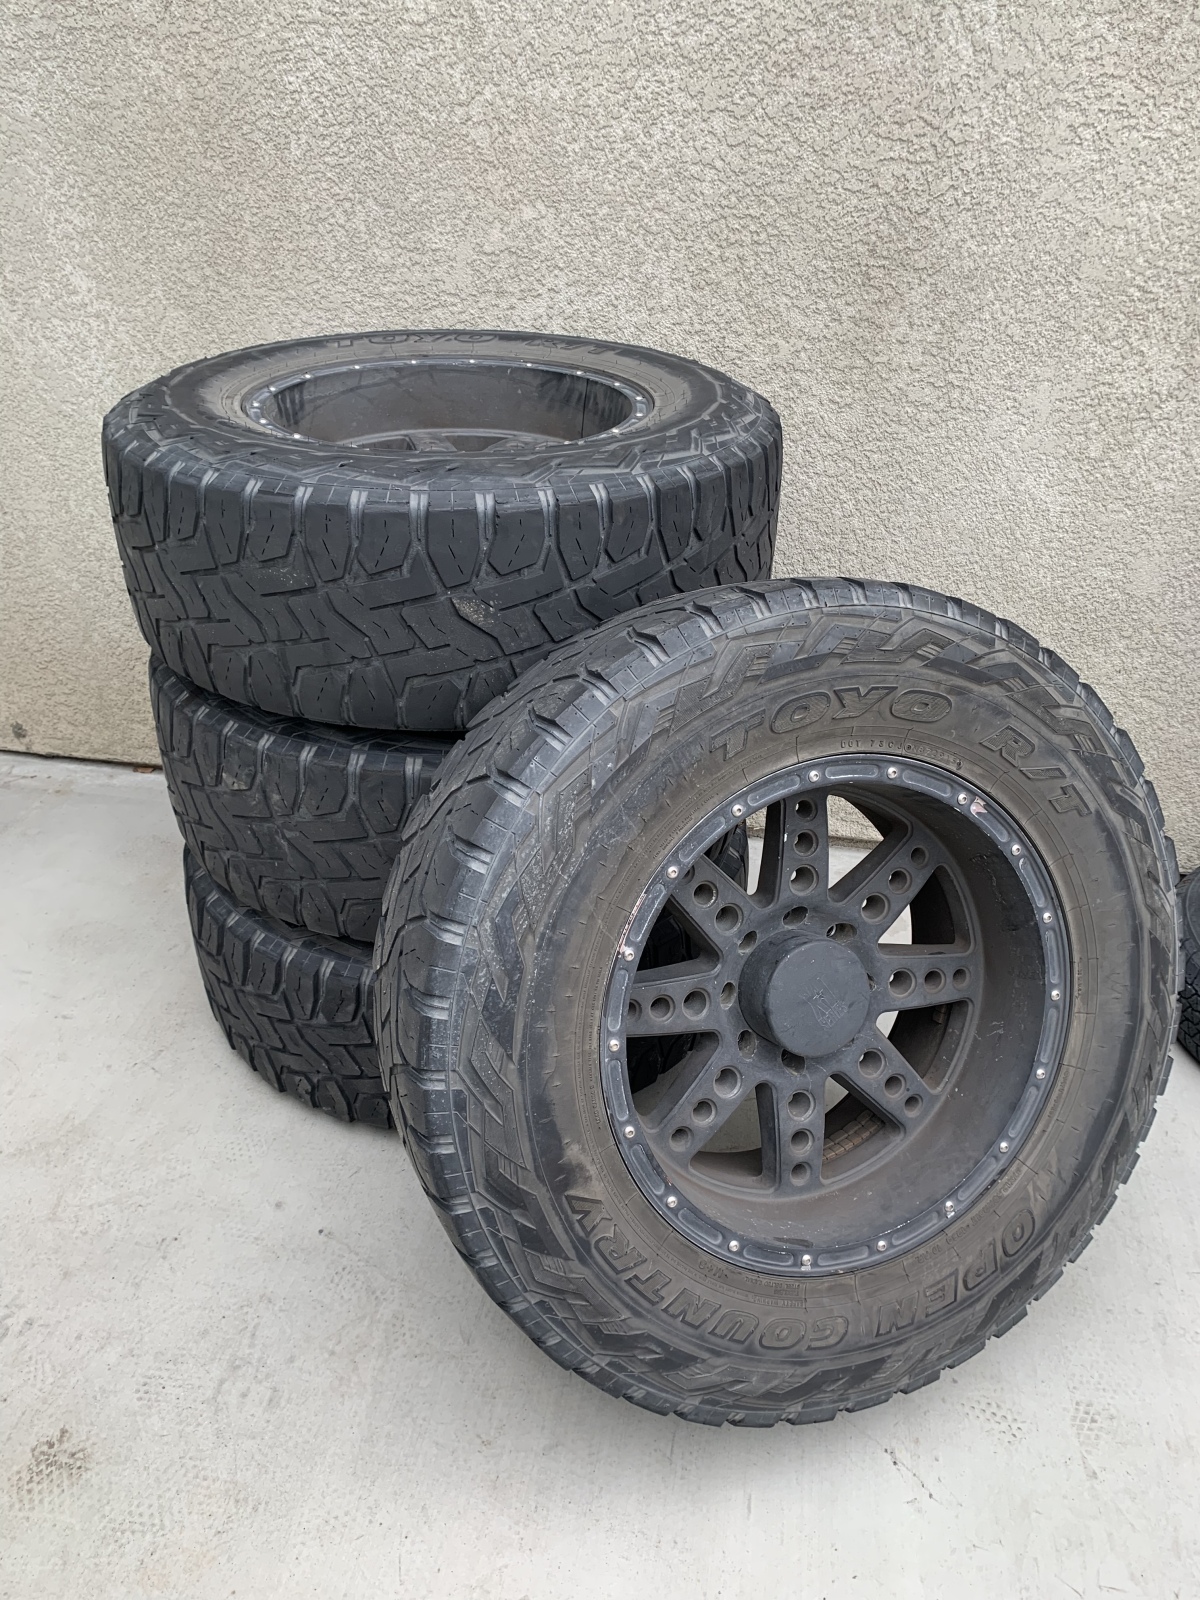 For Sale: 37” Toyo tires on 20” wheels 8 lug Chevy  - photo0